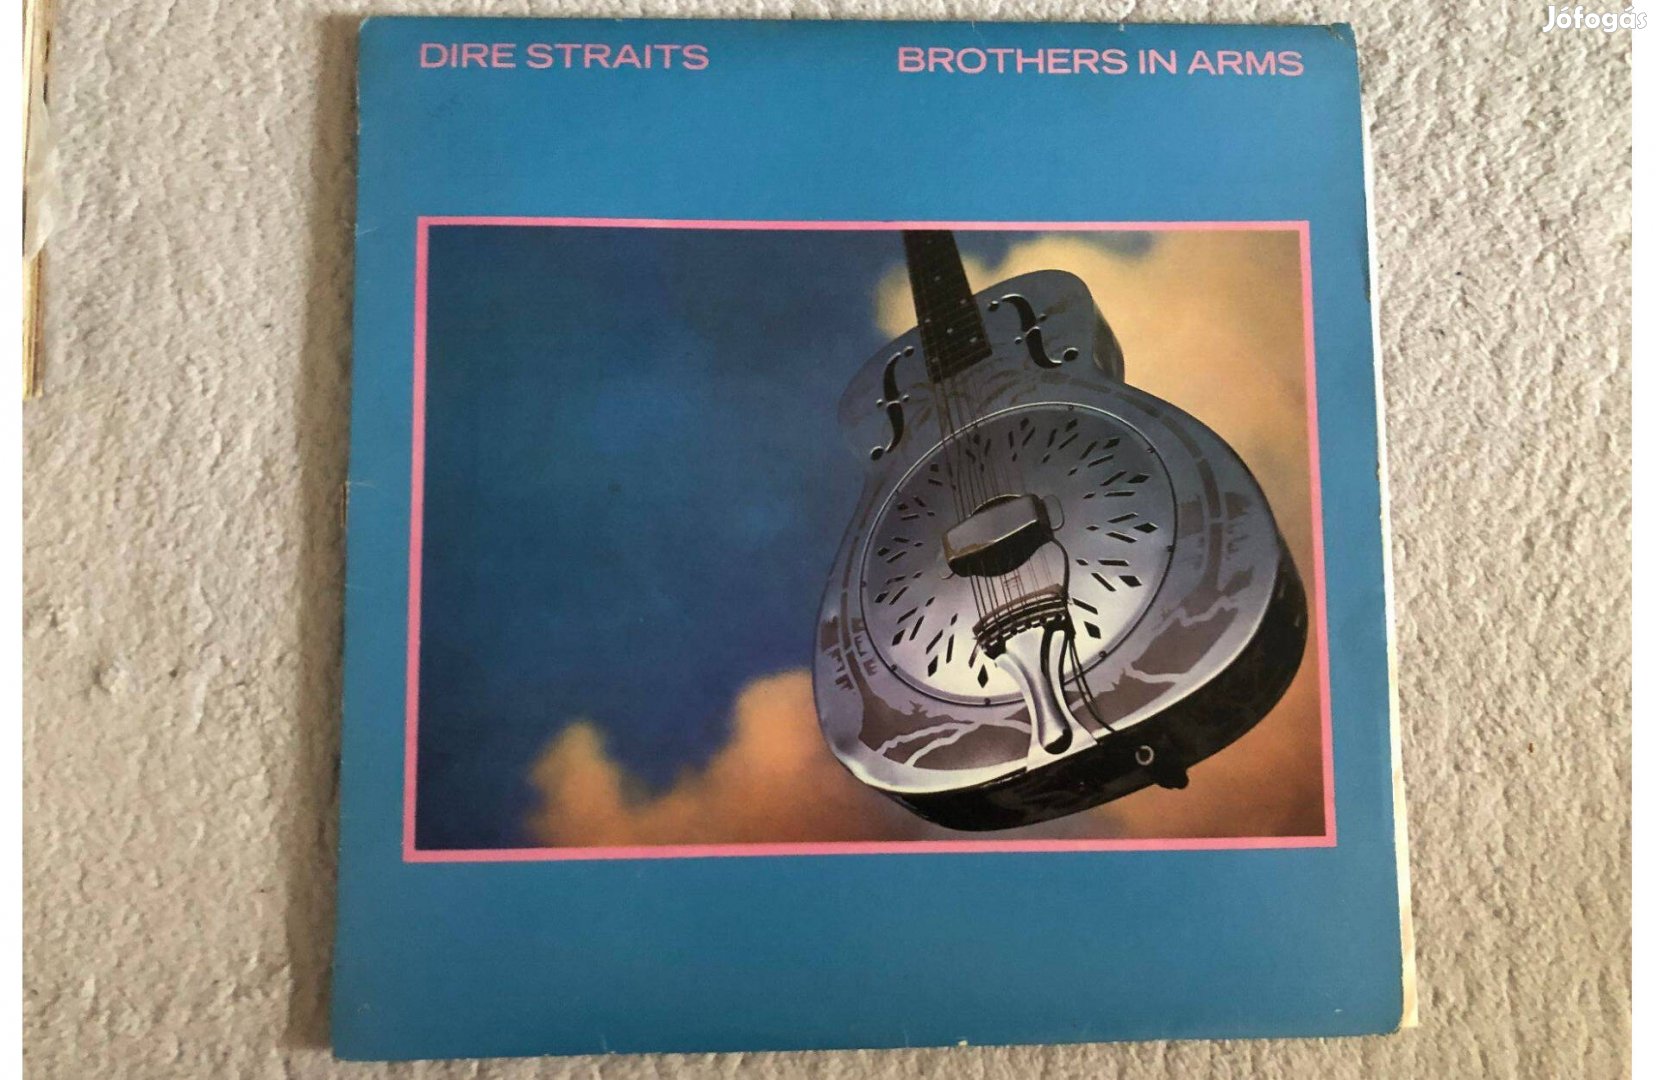 Dire Straits - Brothers in Arms bakelit LP